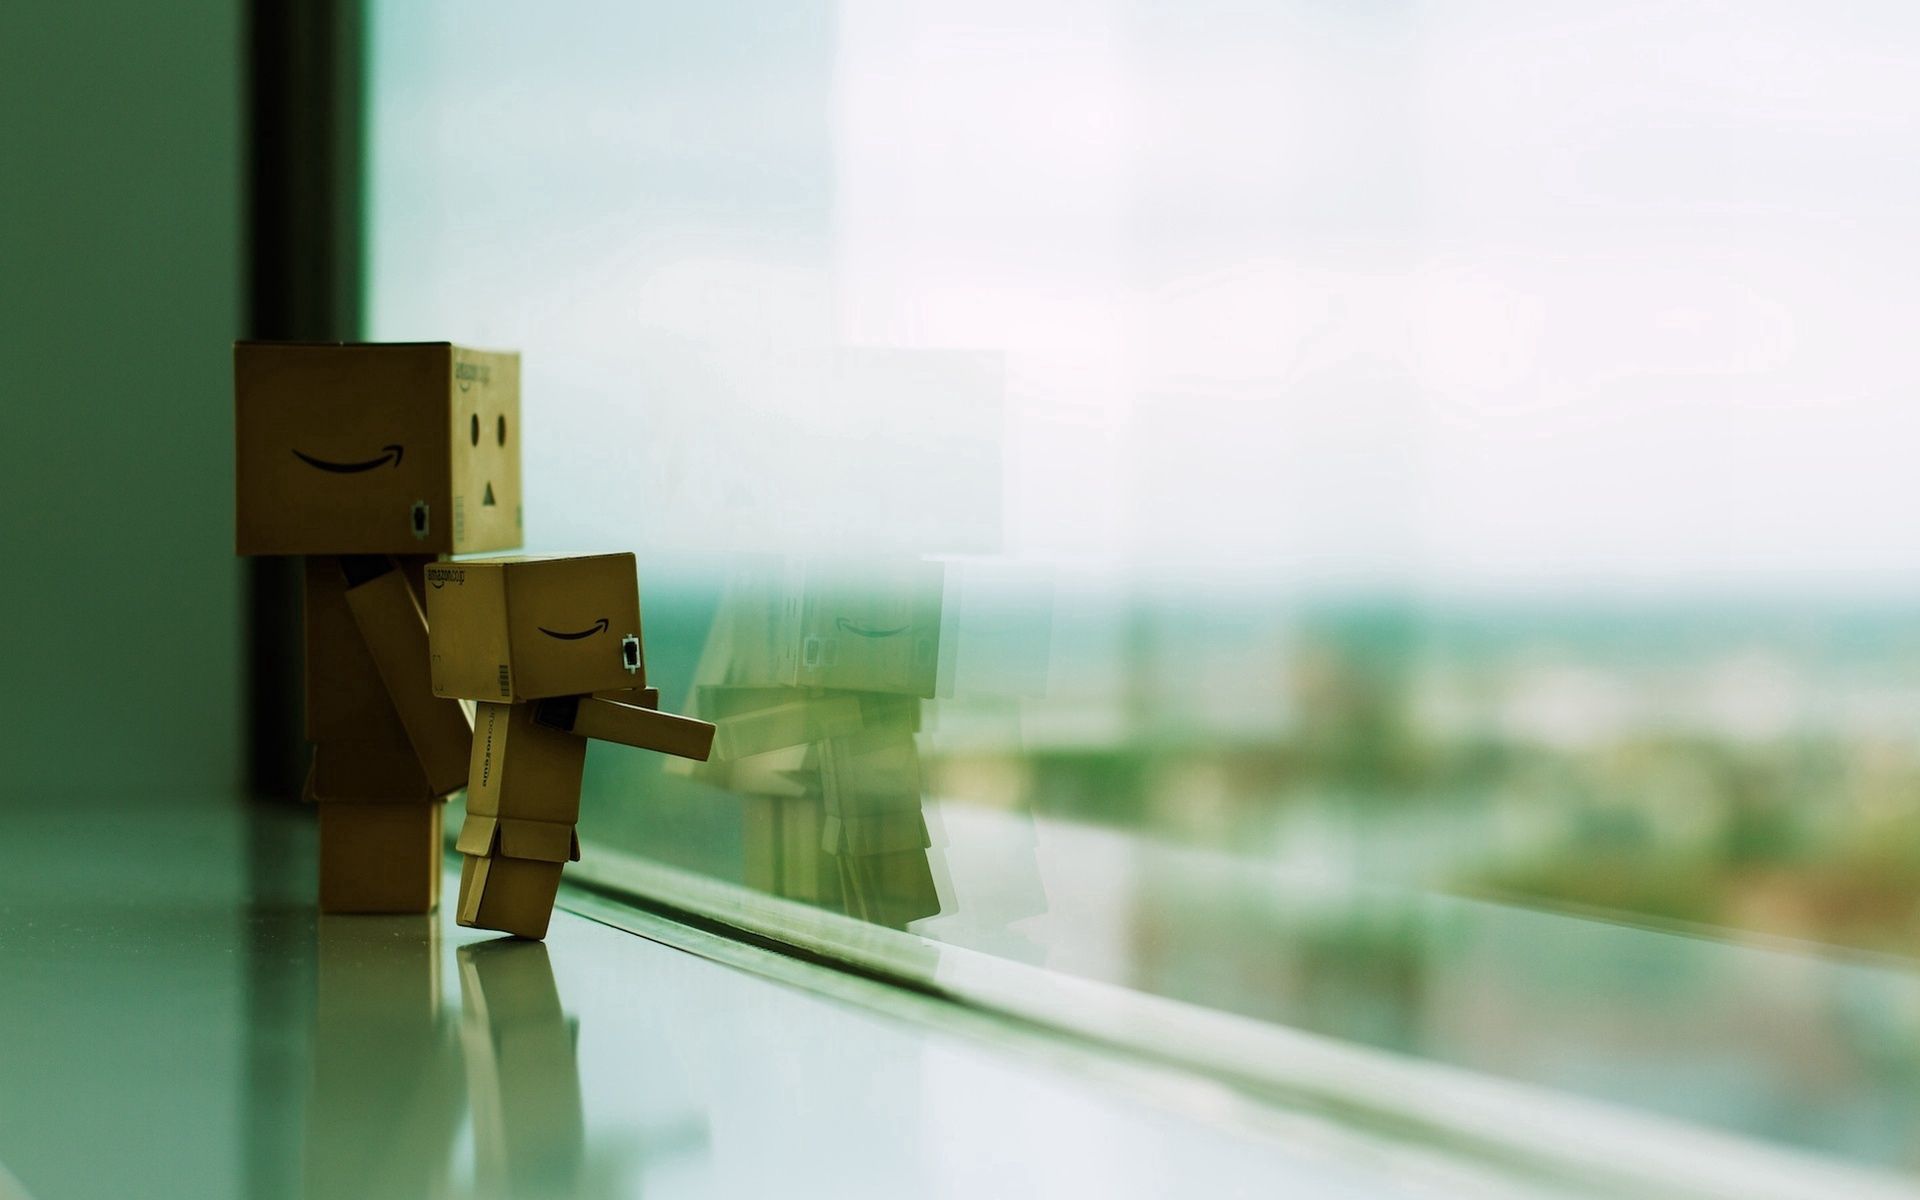 miscellanea, miscellaneous, couple, pair, window, cardboard robot, to stand, stand, danboard